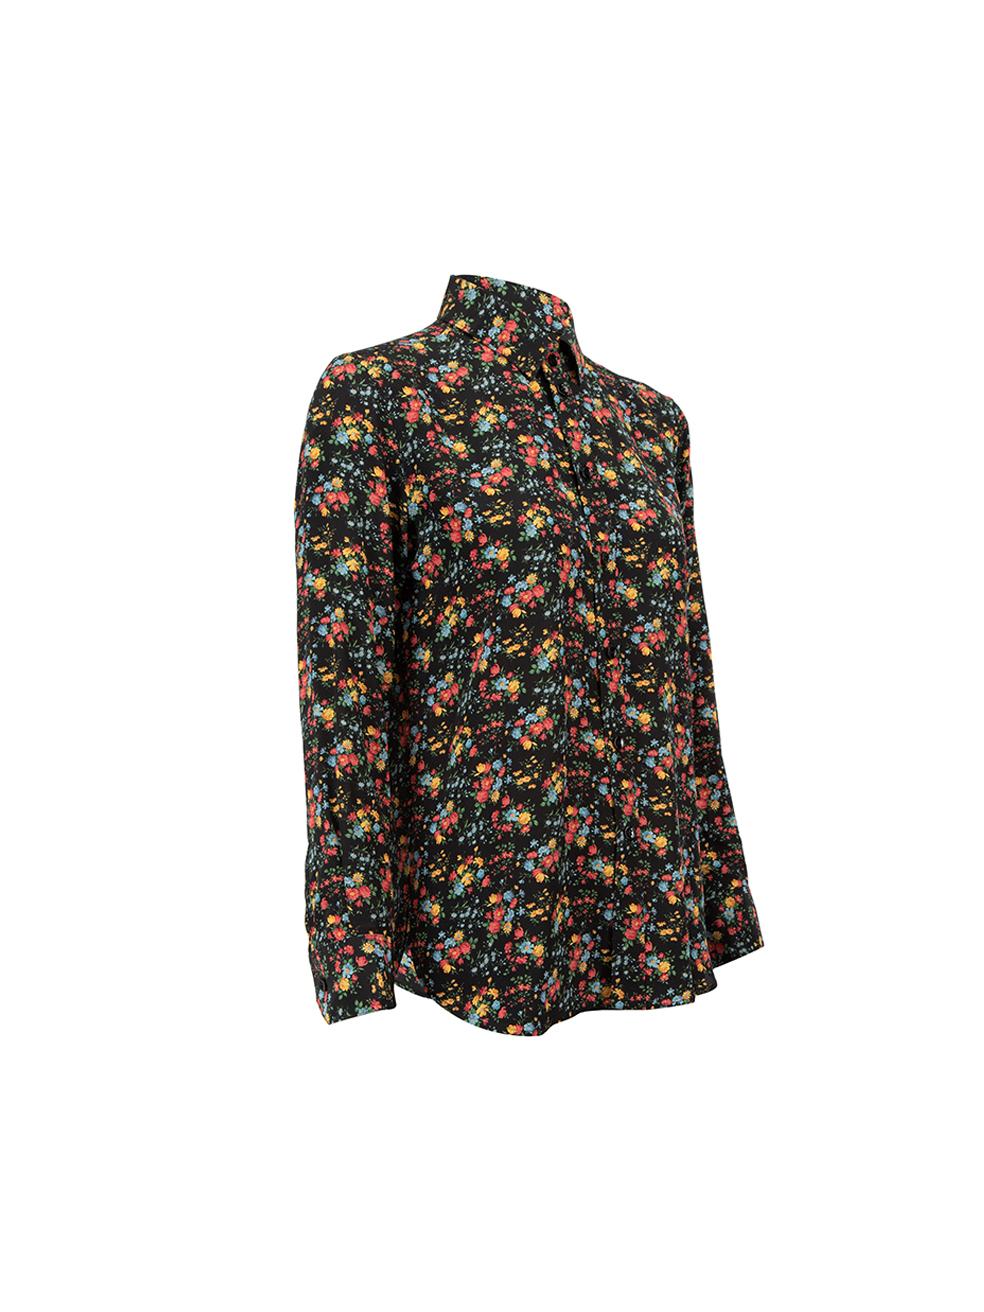 CONDITION is Very good. Minimal wear to top is evident. Minimal wear to the underarms with slight discolouration on this used Saint Laurent designer resale item. 



Details


Black

Silk

Long sleeves shirt

Floral print pattern

Front button up